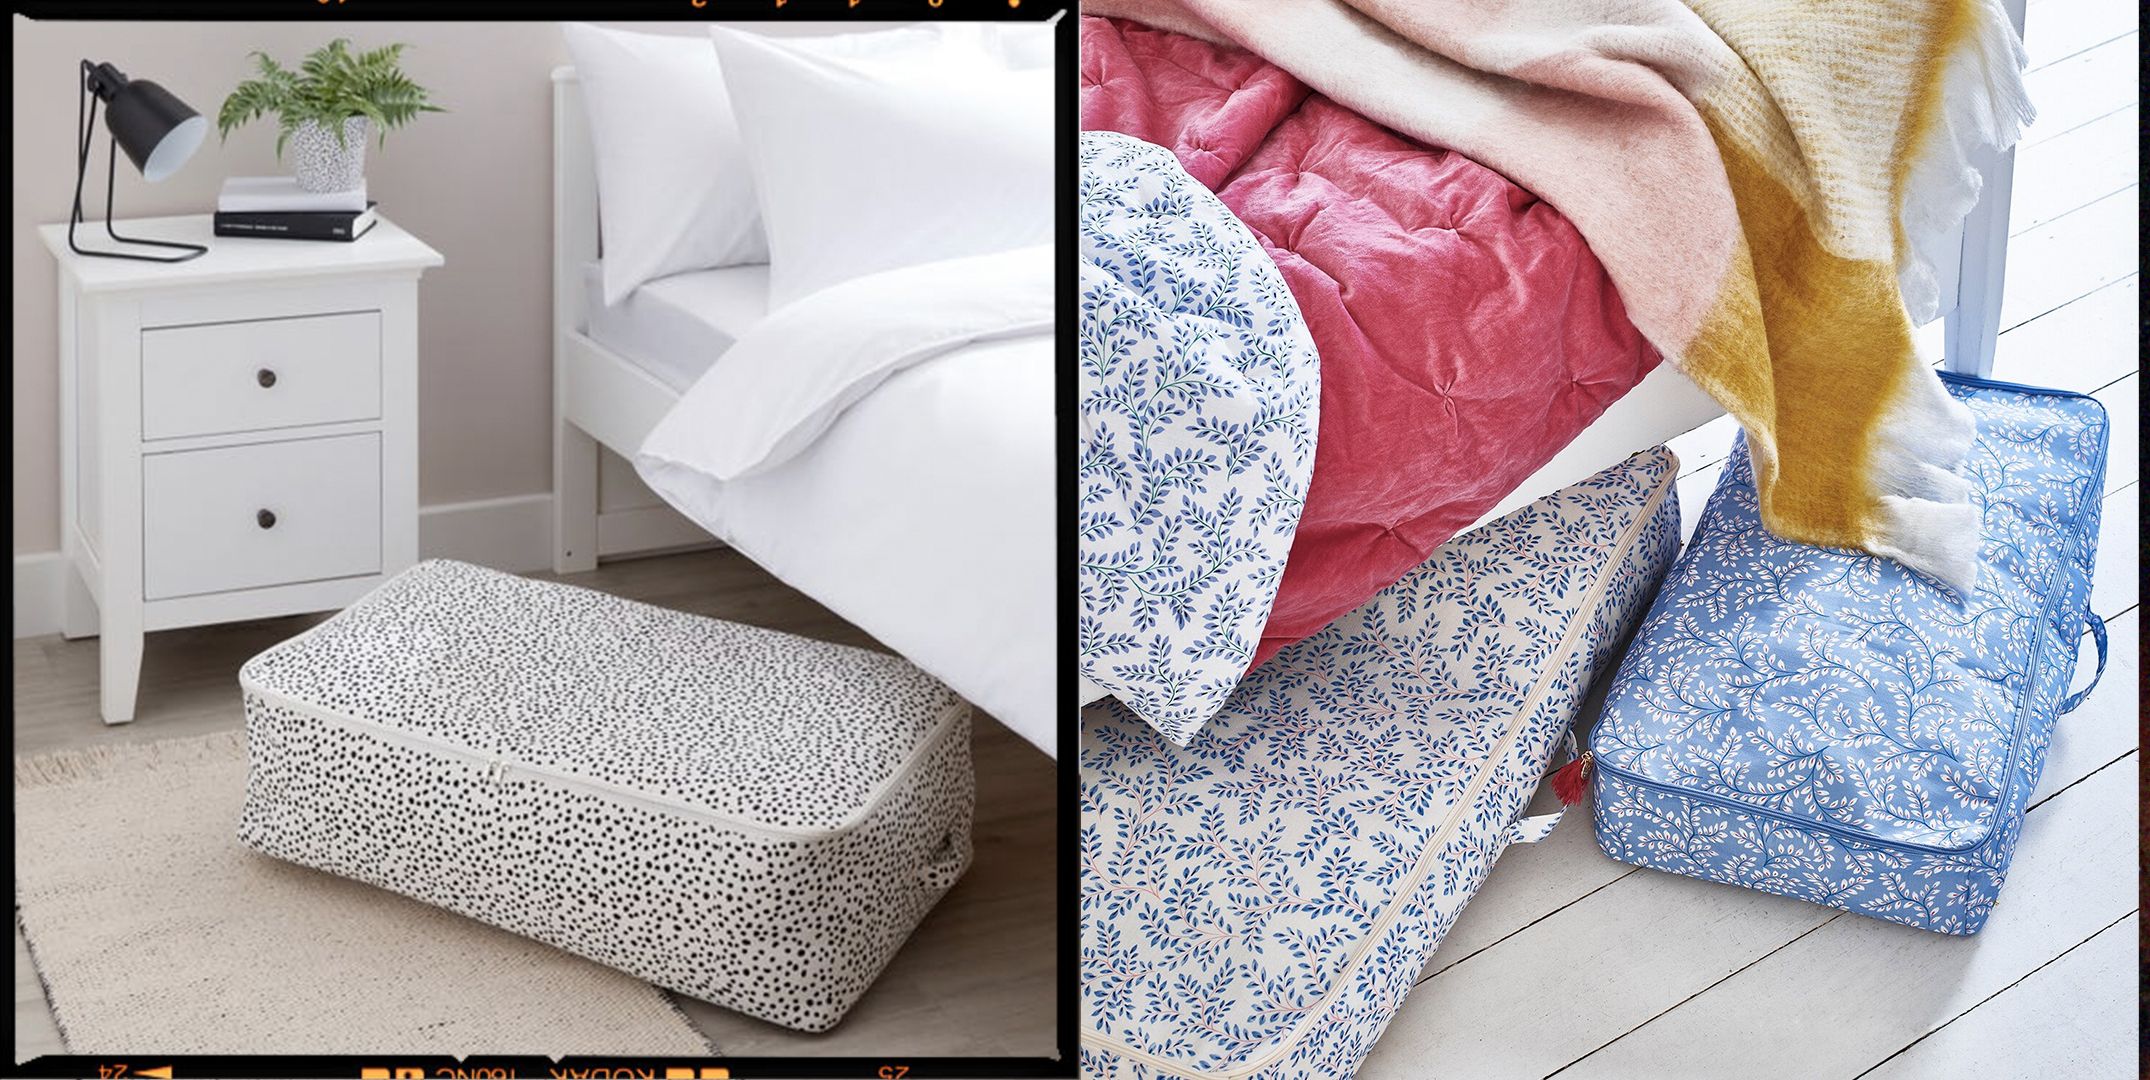 14 AMAZING UNDER BED STORAGE IDEAS - A Fresh-Squeezed Life